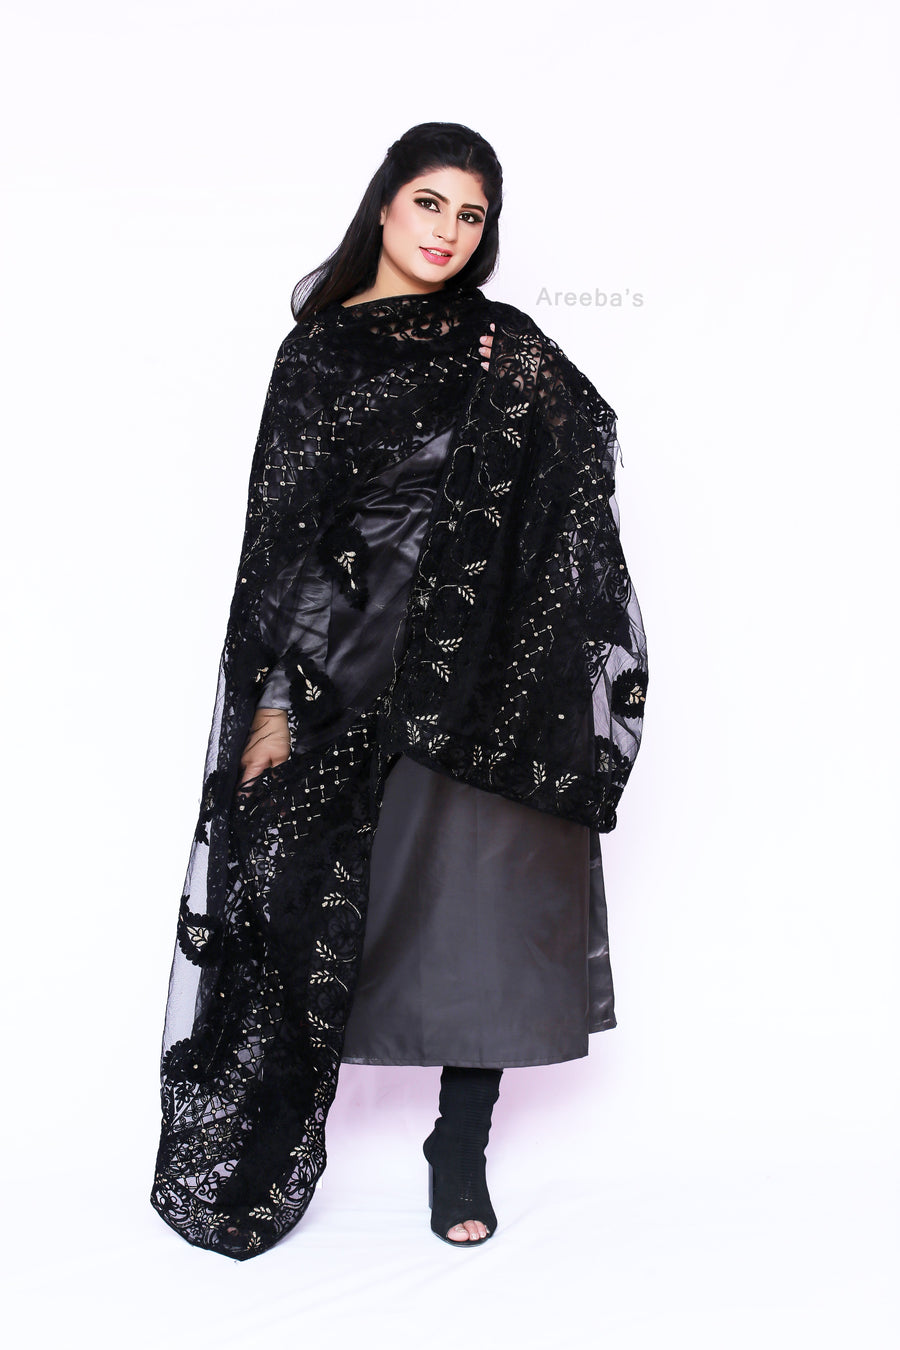 Night Net embroidered- Areeba's Couture